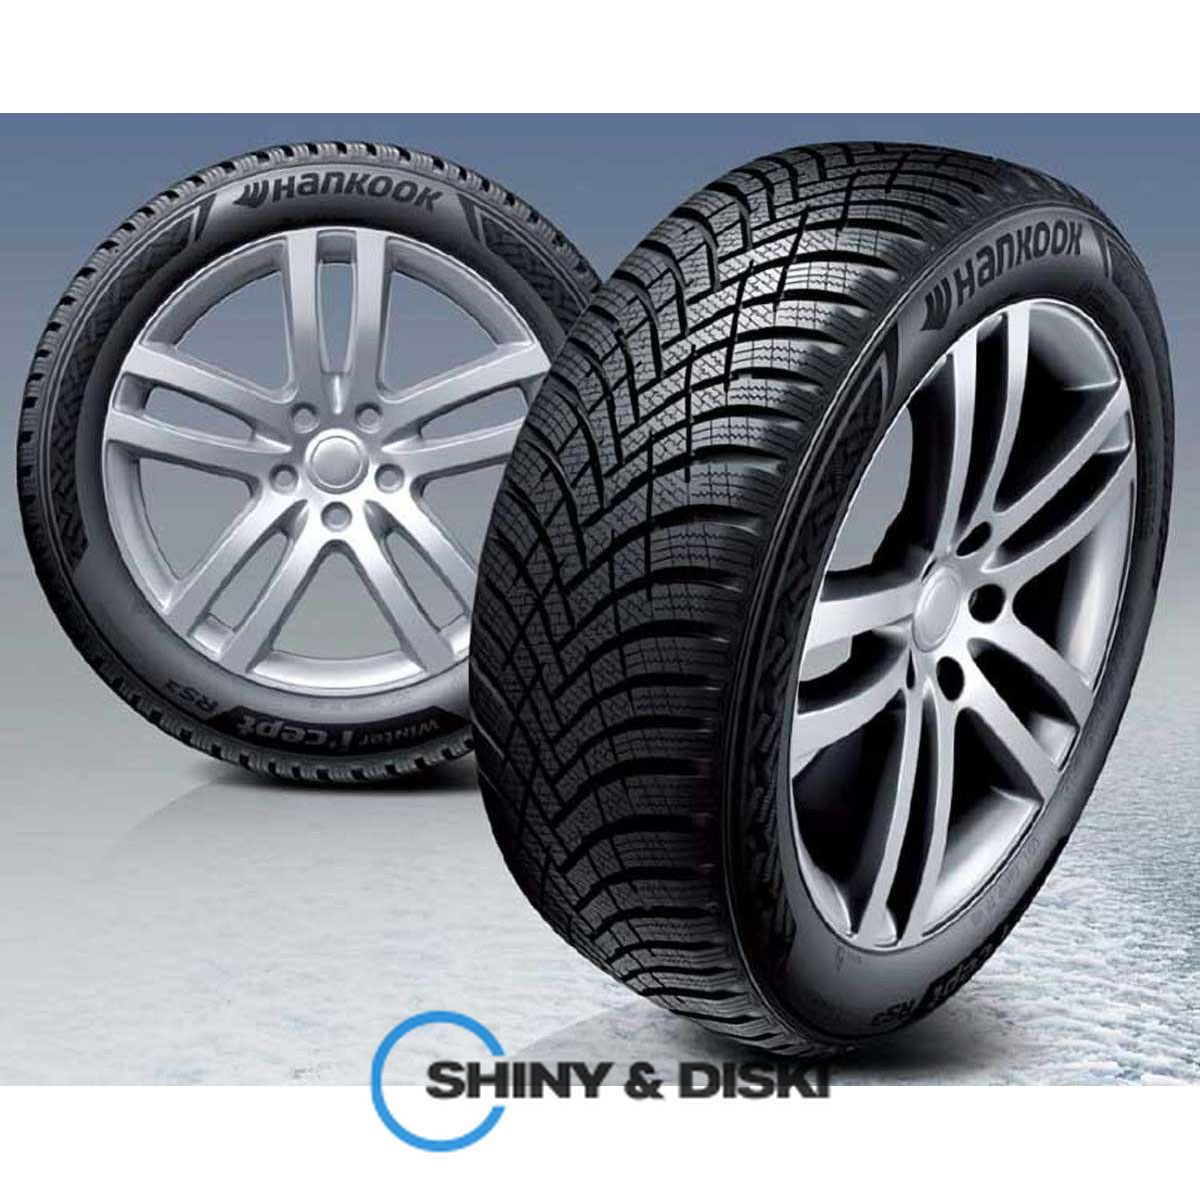 покрышки hankook winter i*cept rs3 w462 215/60 r16 99h xl